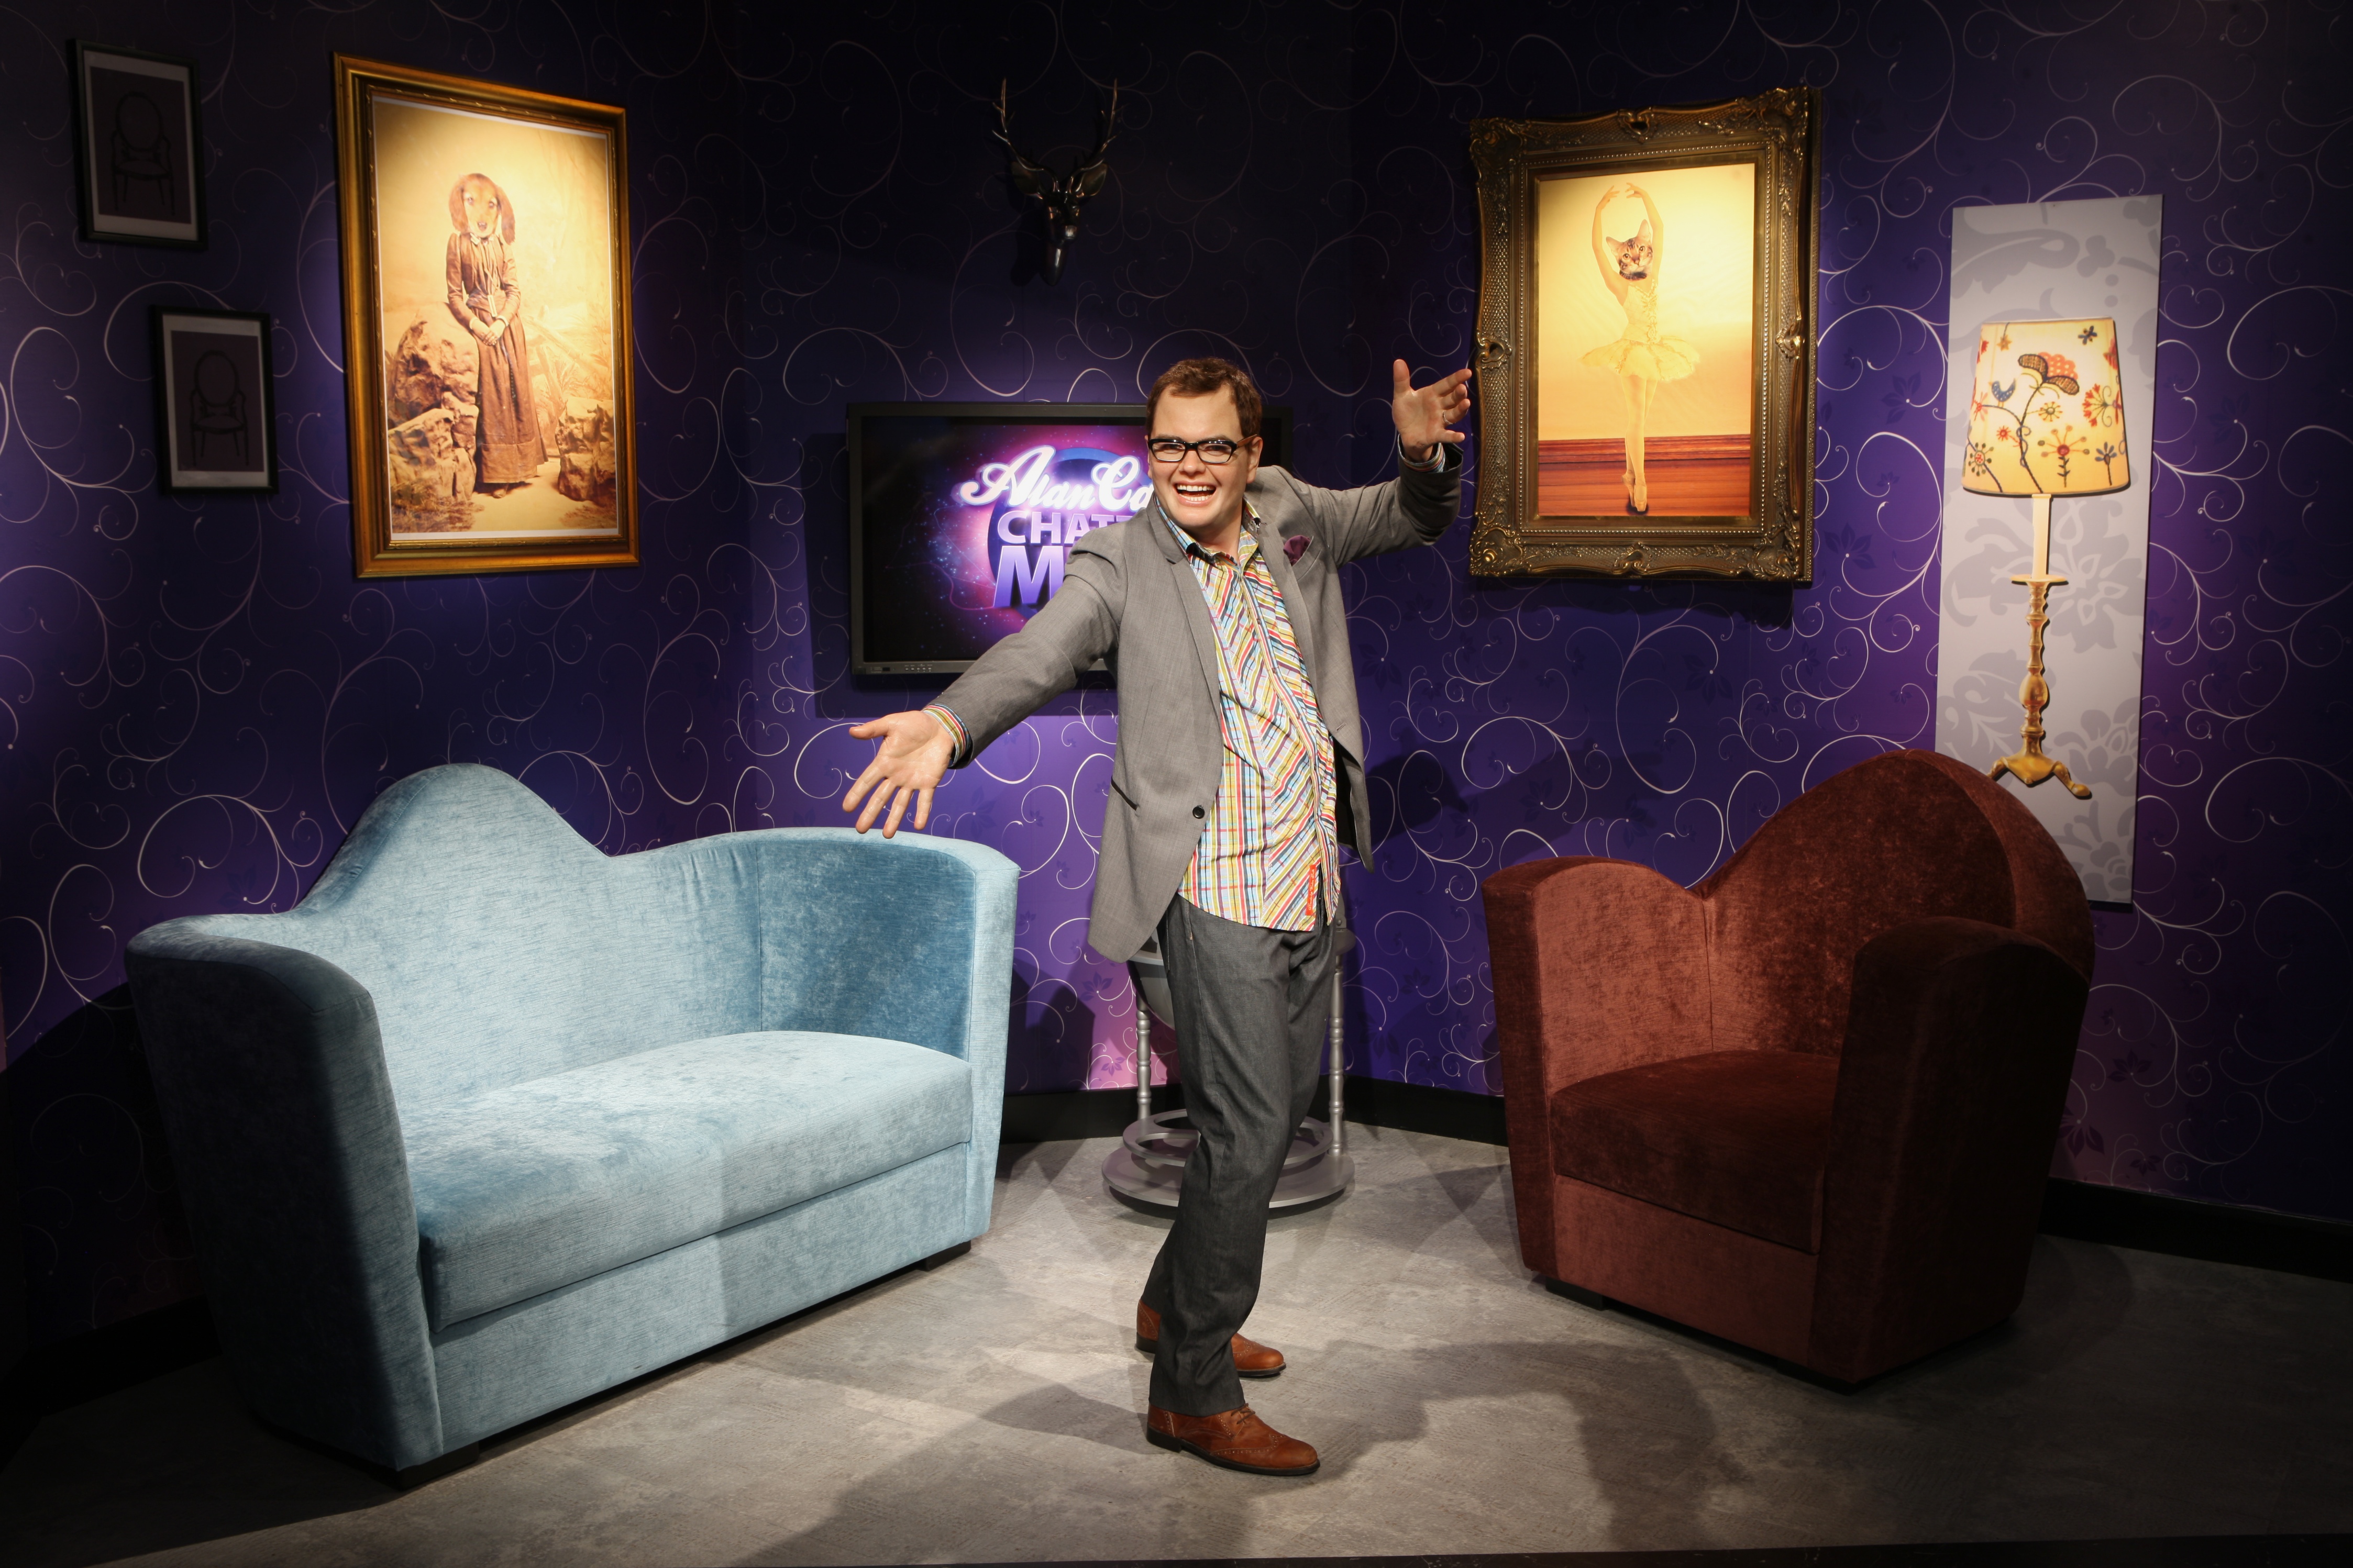 Alan Carr's wax figure on set of his show at Madame Tussauds Blackpool